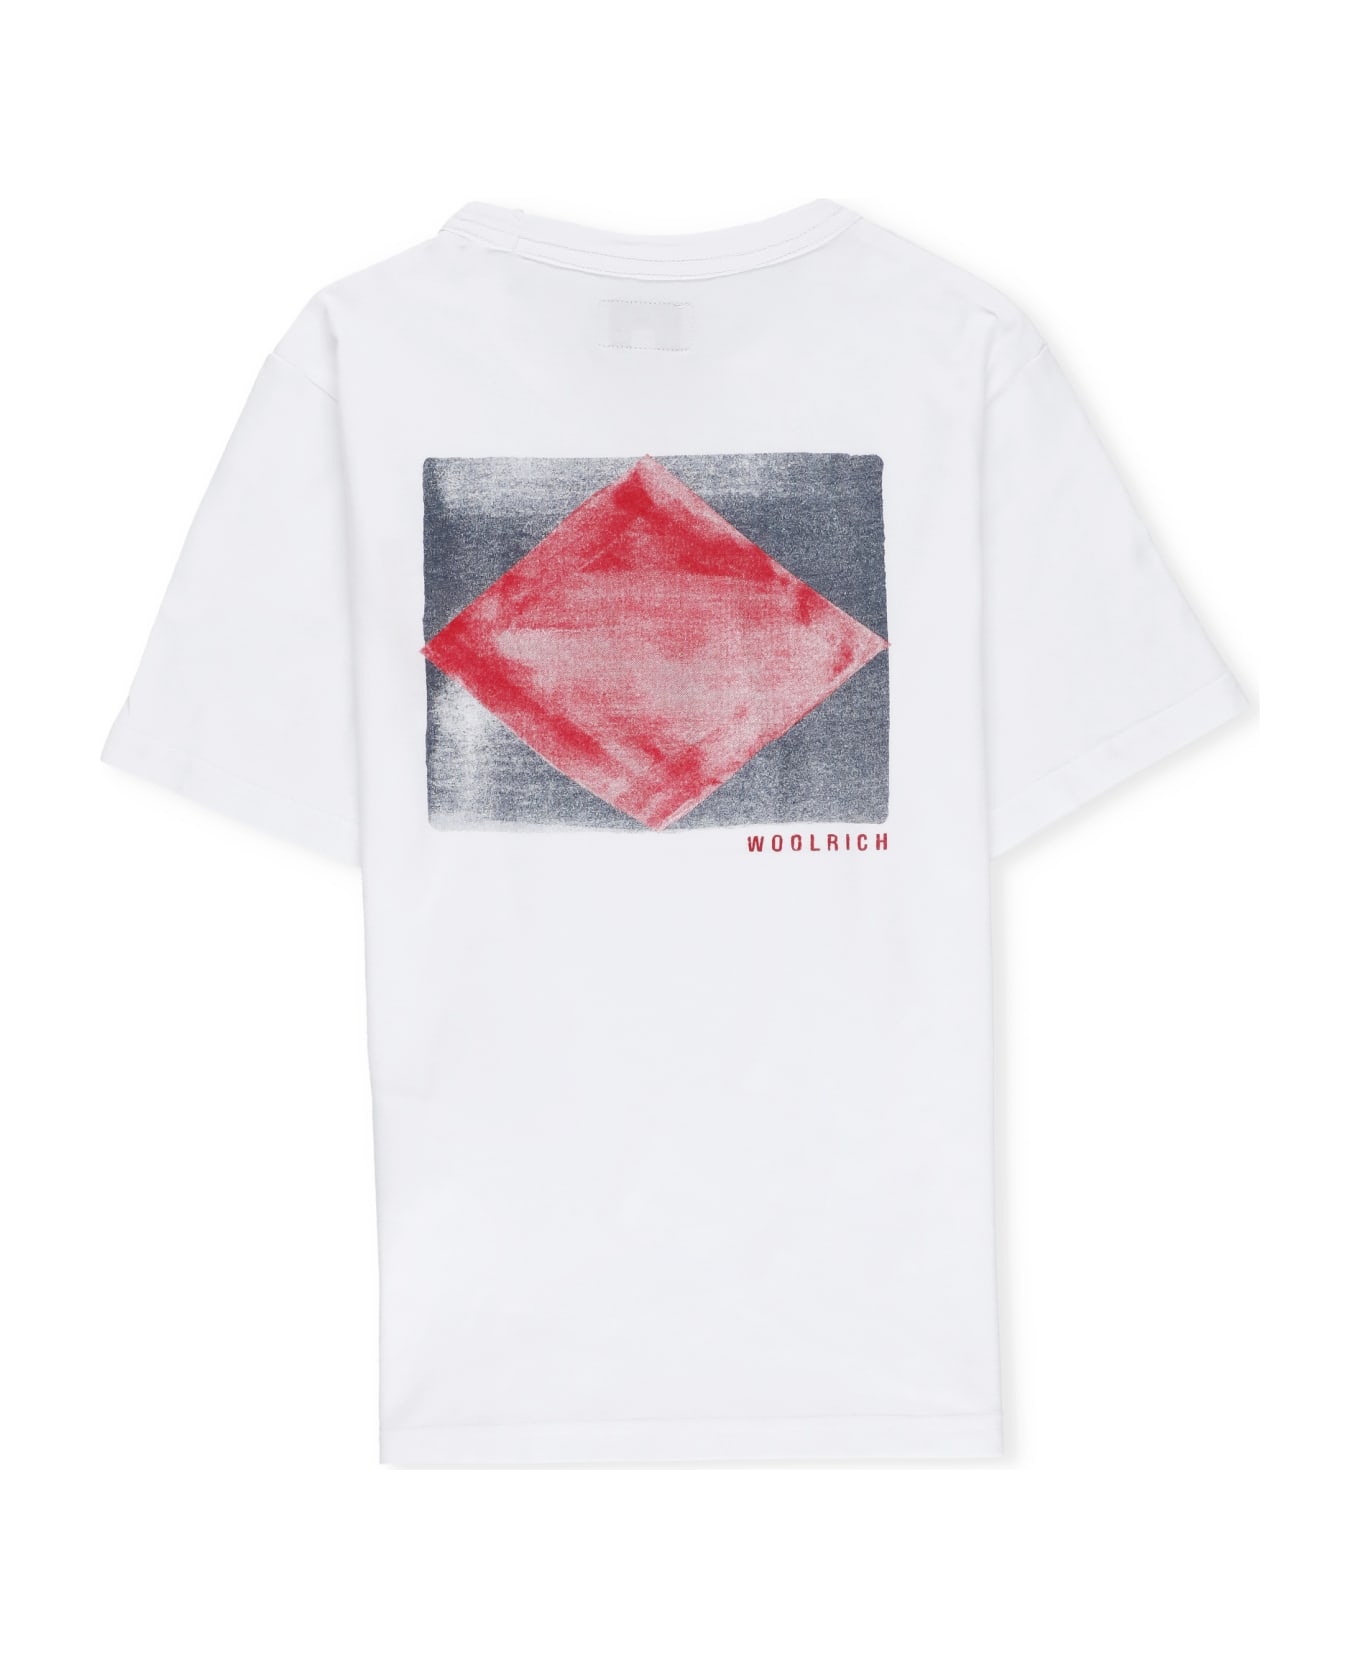 Woolrich T-shirt With Print - White